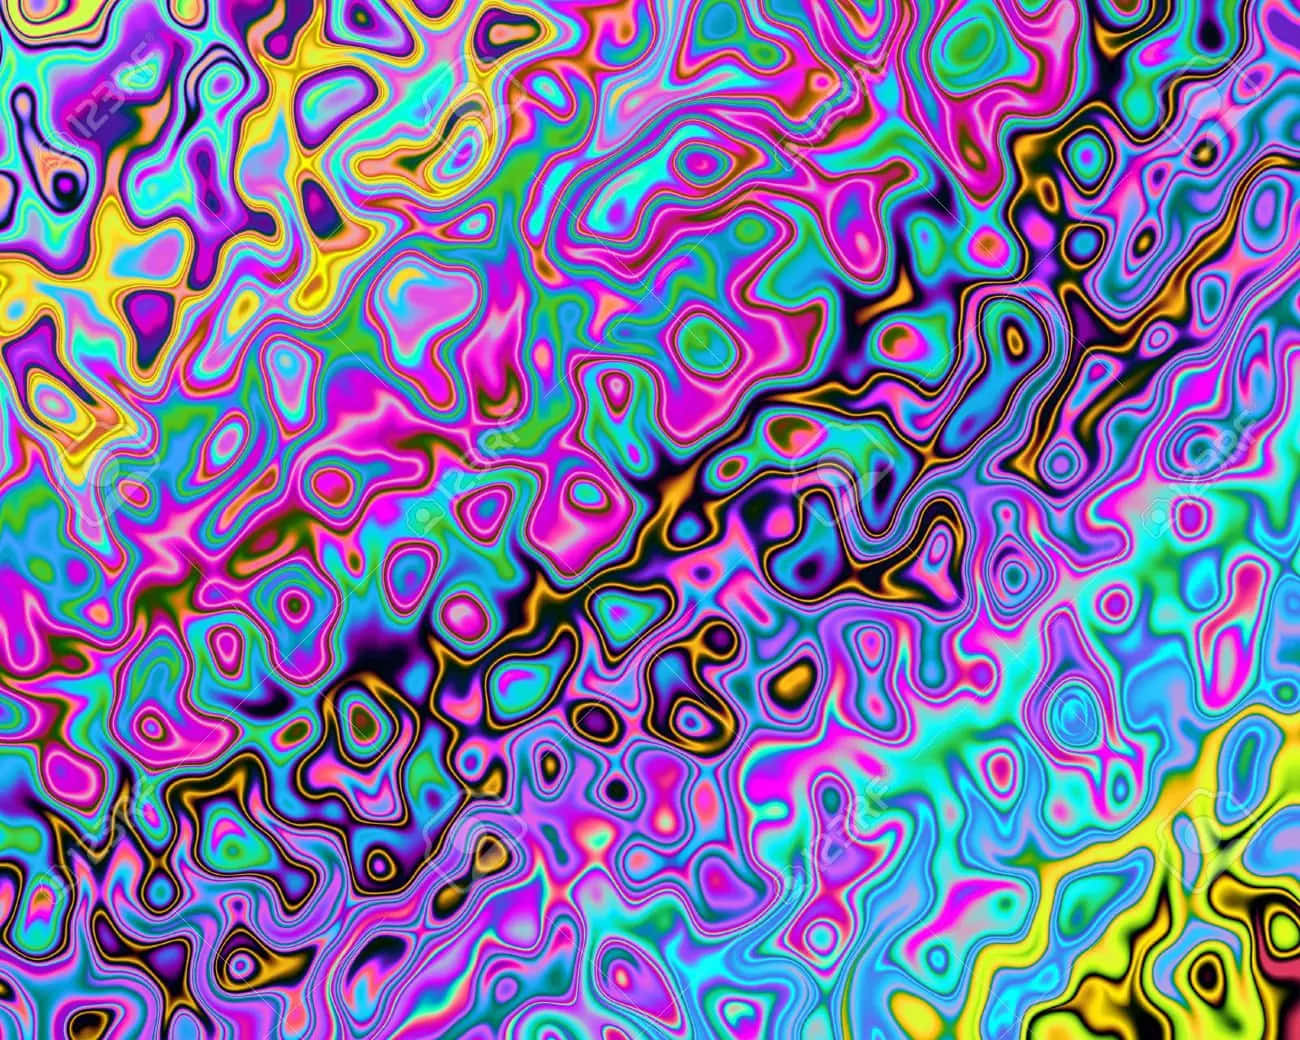 "The beautiful explosion of psychedelic colors" Wallpaper